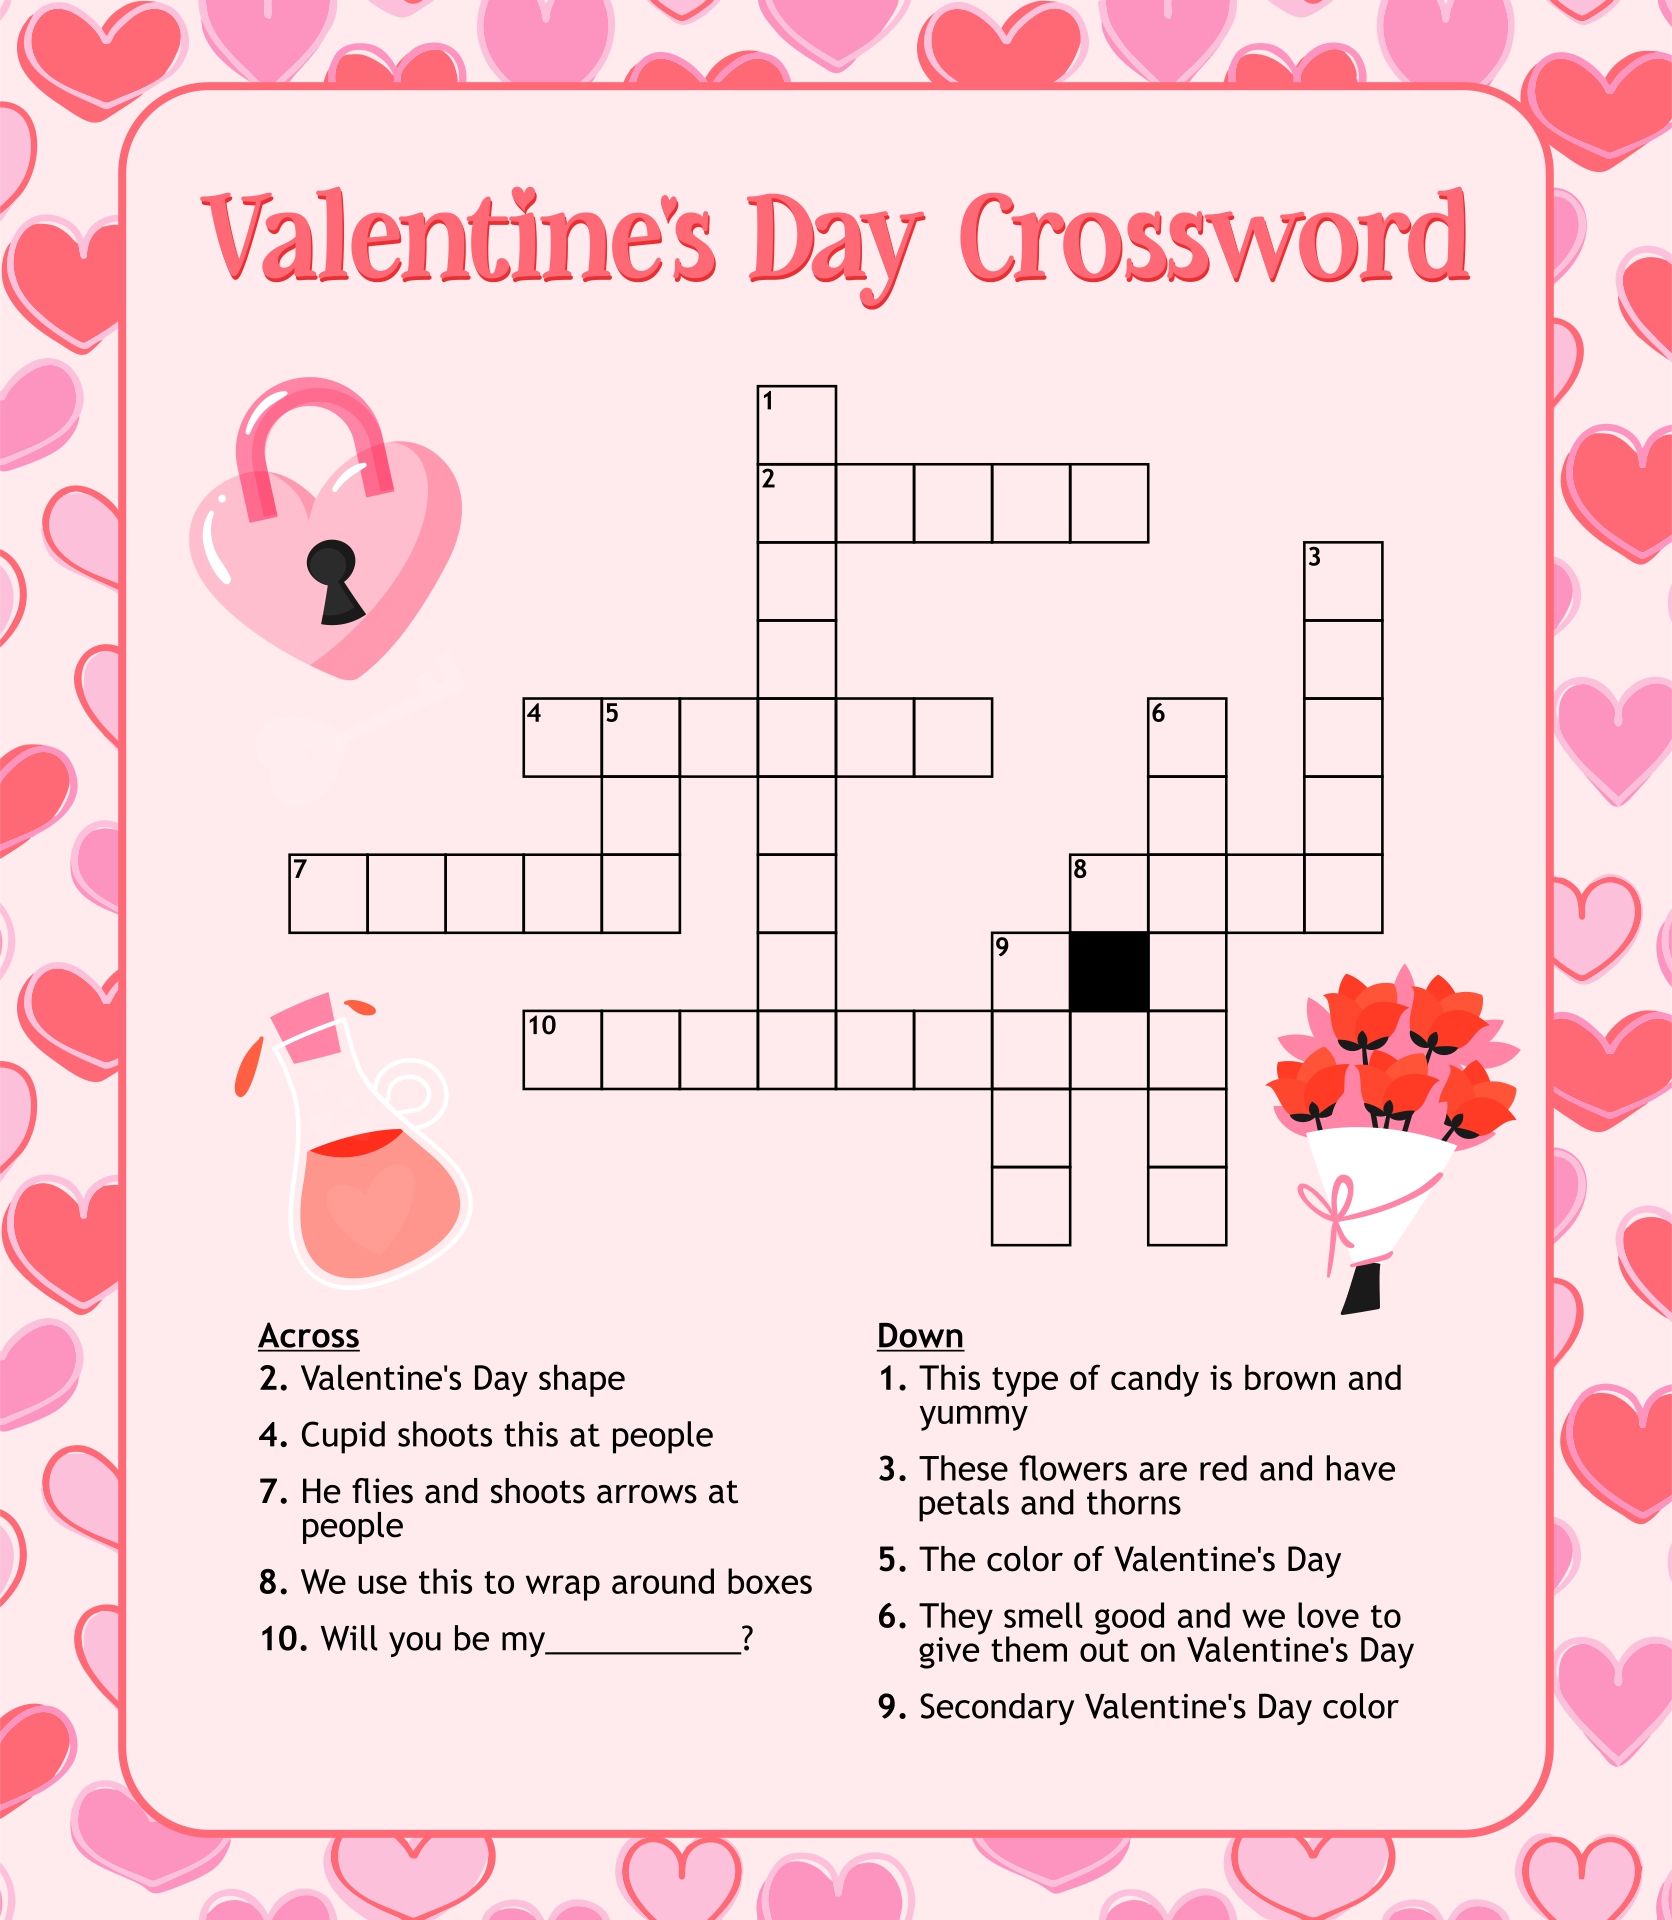 valentines-day-criss-cross-puzzle-free-printable-puzzle-games